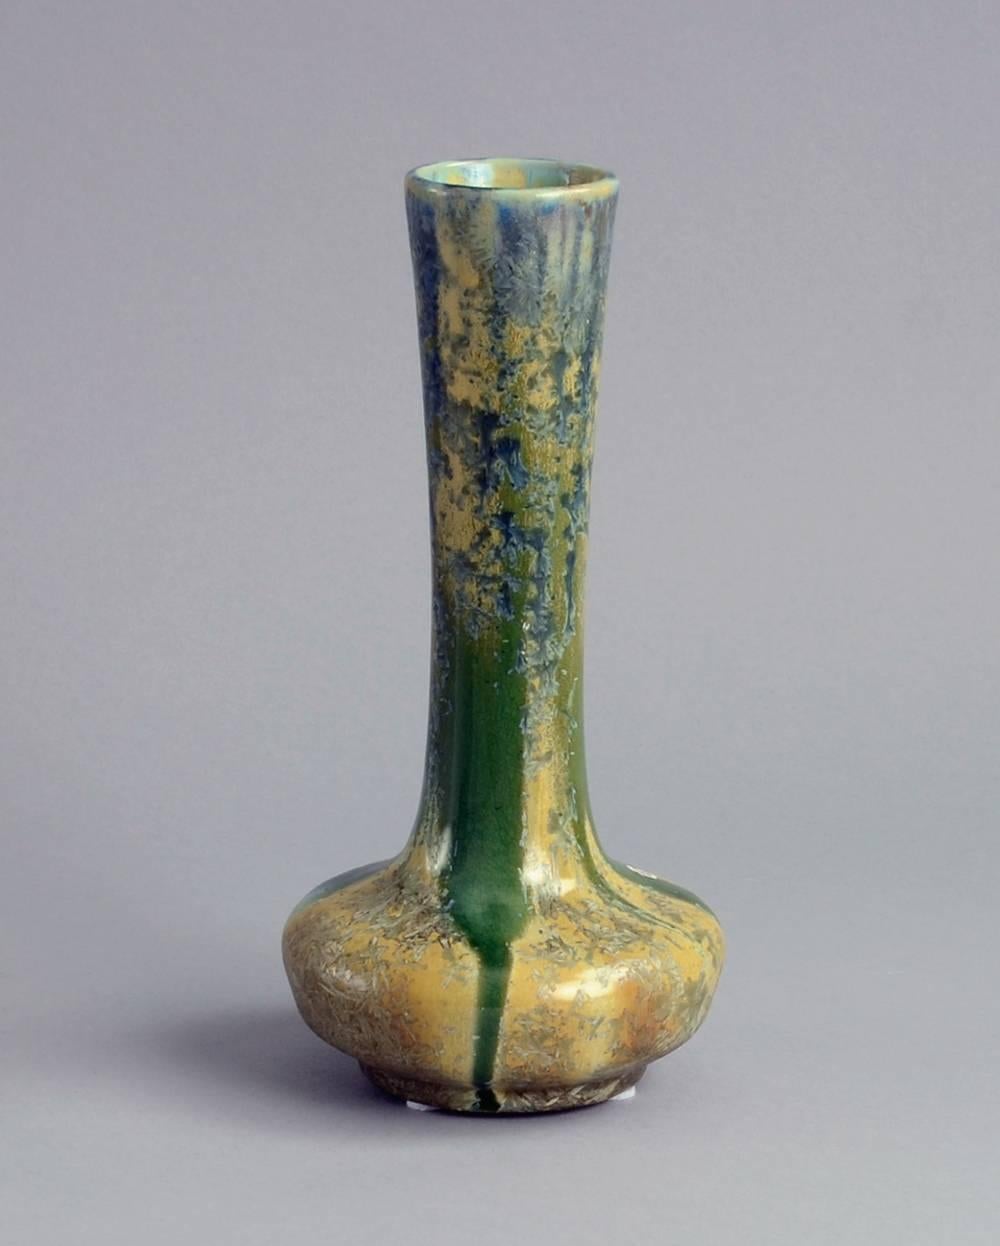 Art Nouveau Stoneware Vase with Dripping Glaze by Pierrefonds, France In Excellent Condition For Sale In New York, NY